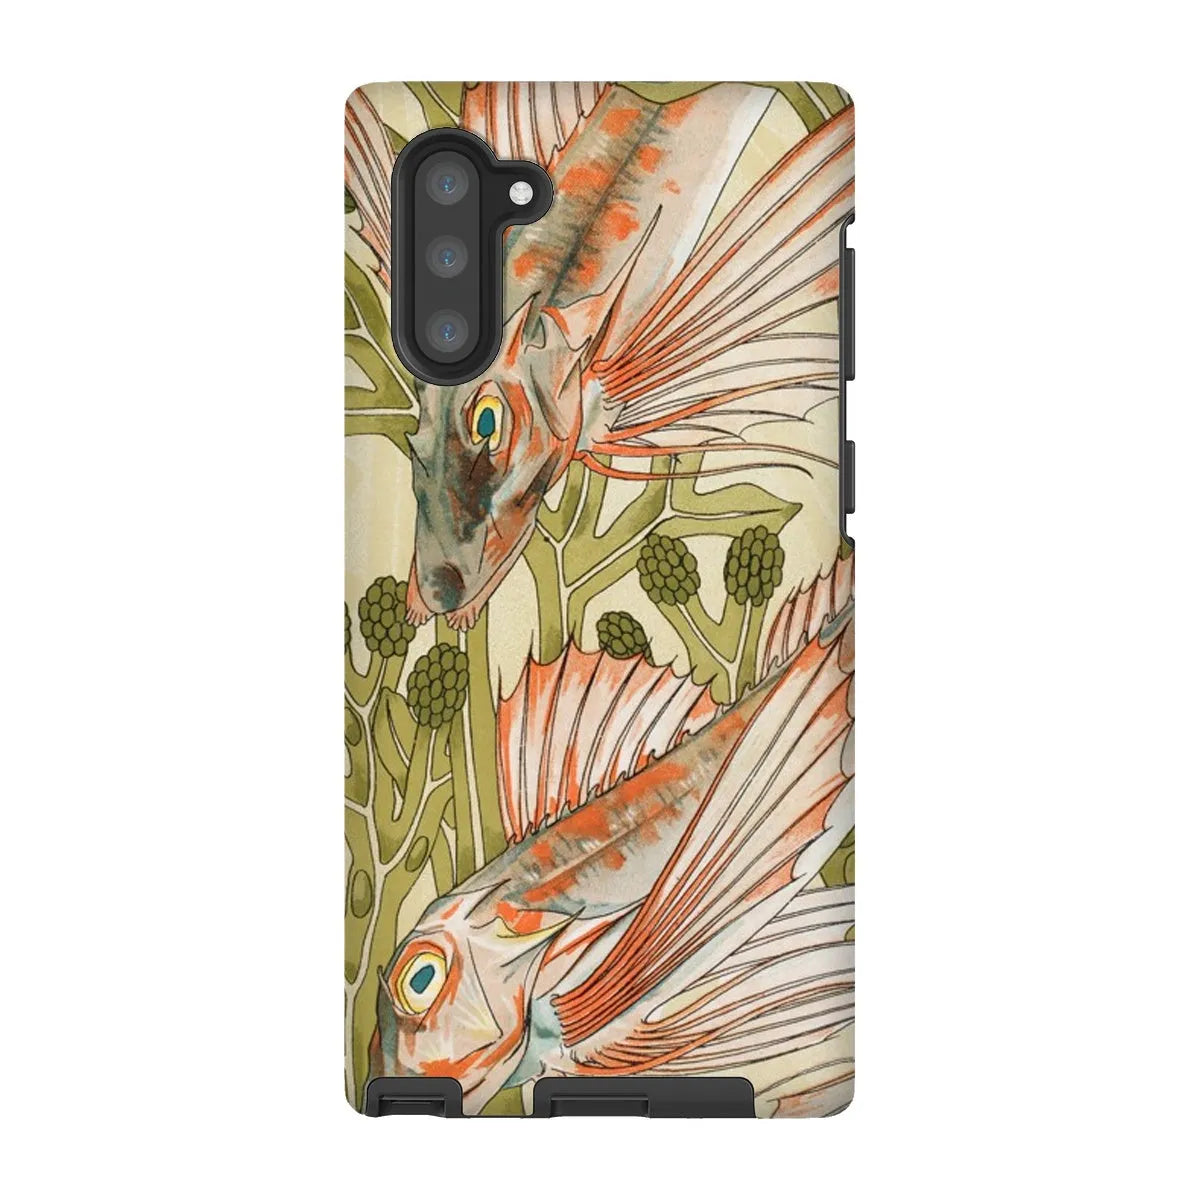 Red Fish - Animal Art Phone Case - Maurice Pillard Verneuil - Samsung Galaxy Note 10 / Matte - Mobile Phone Cases